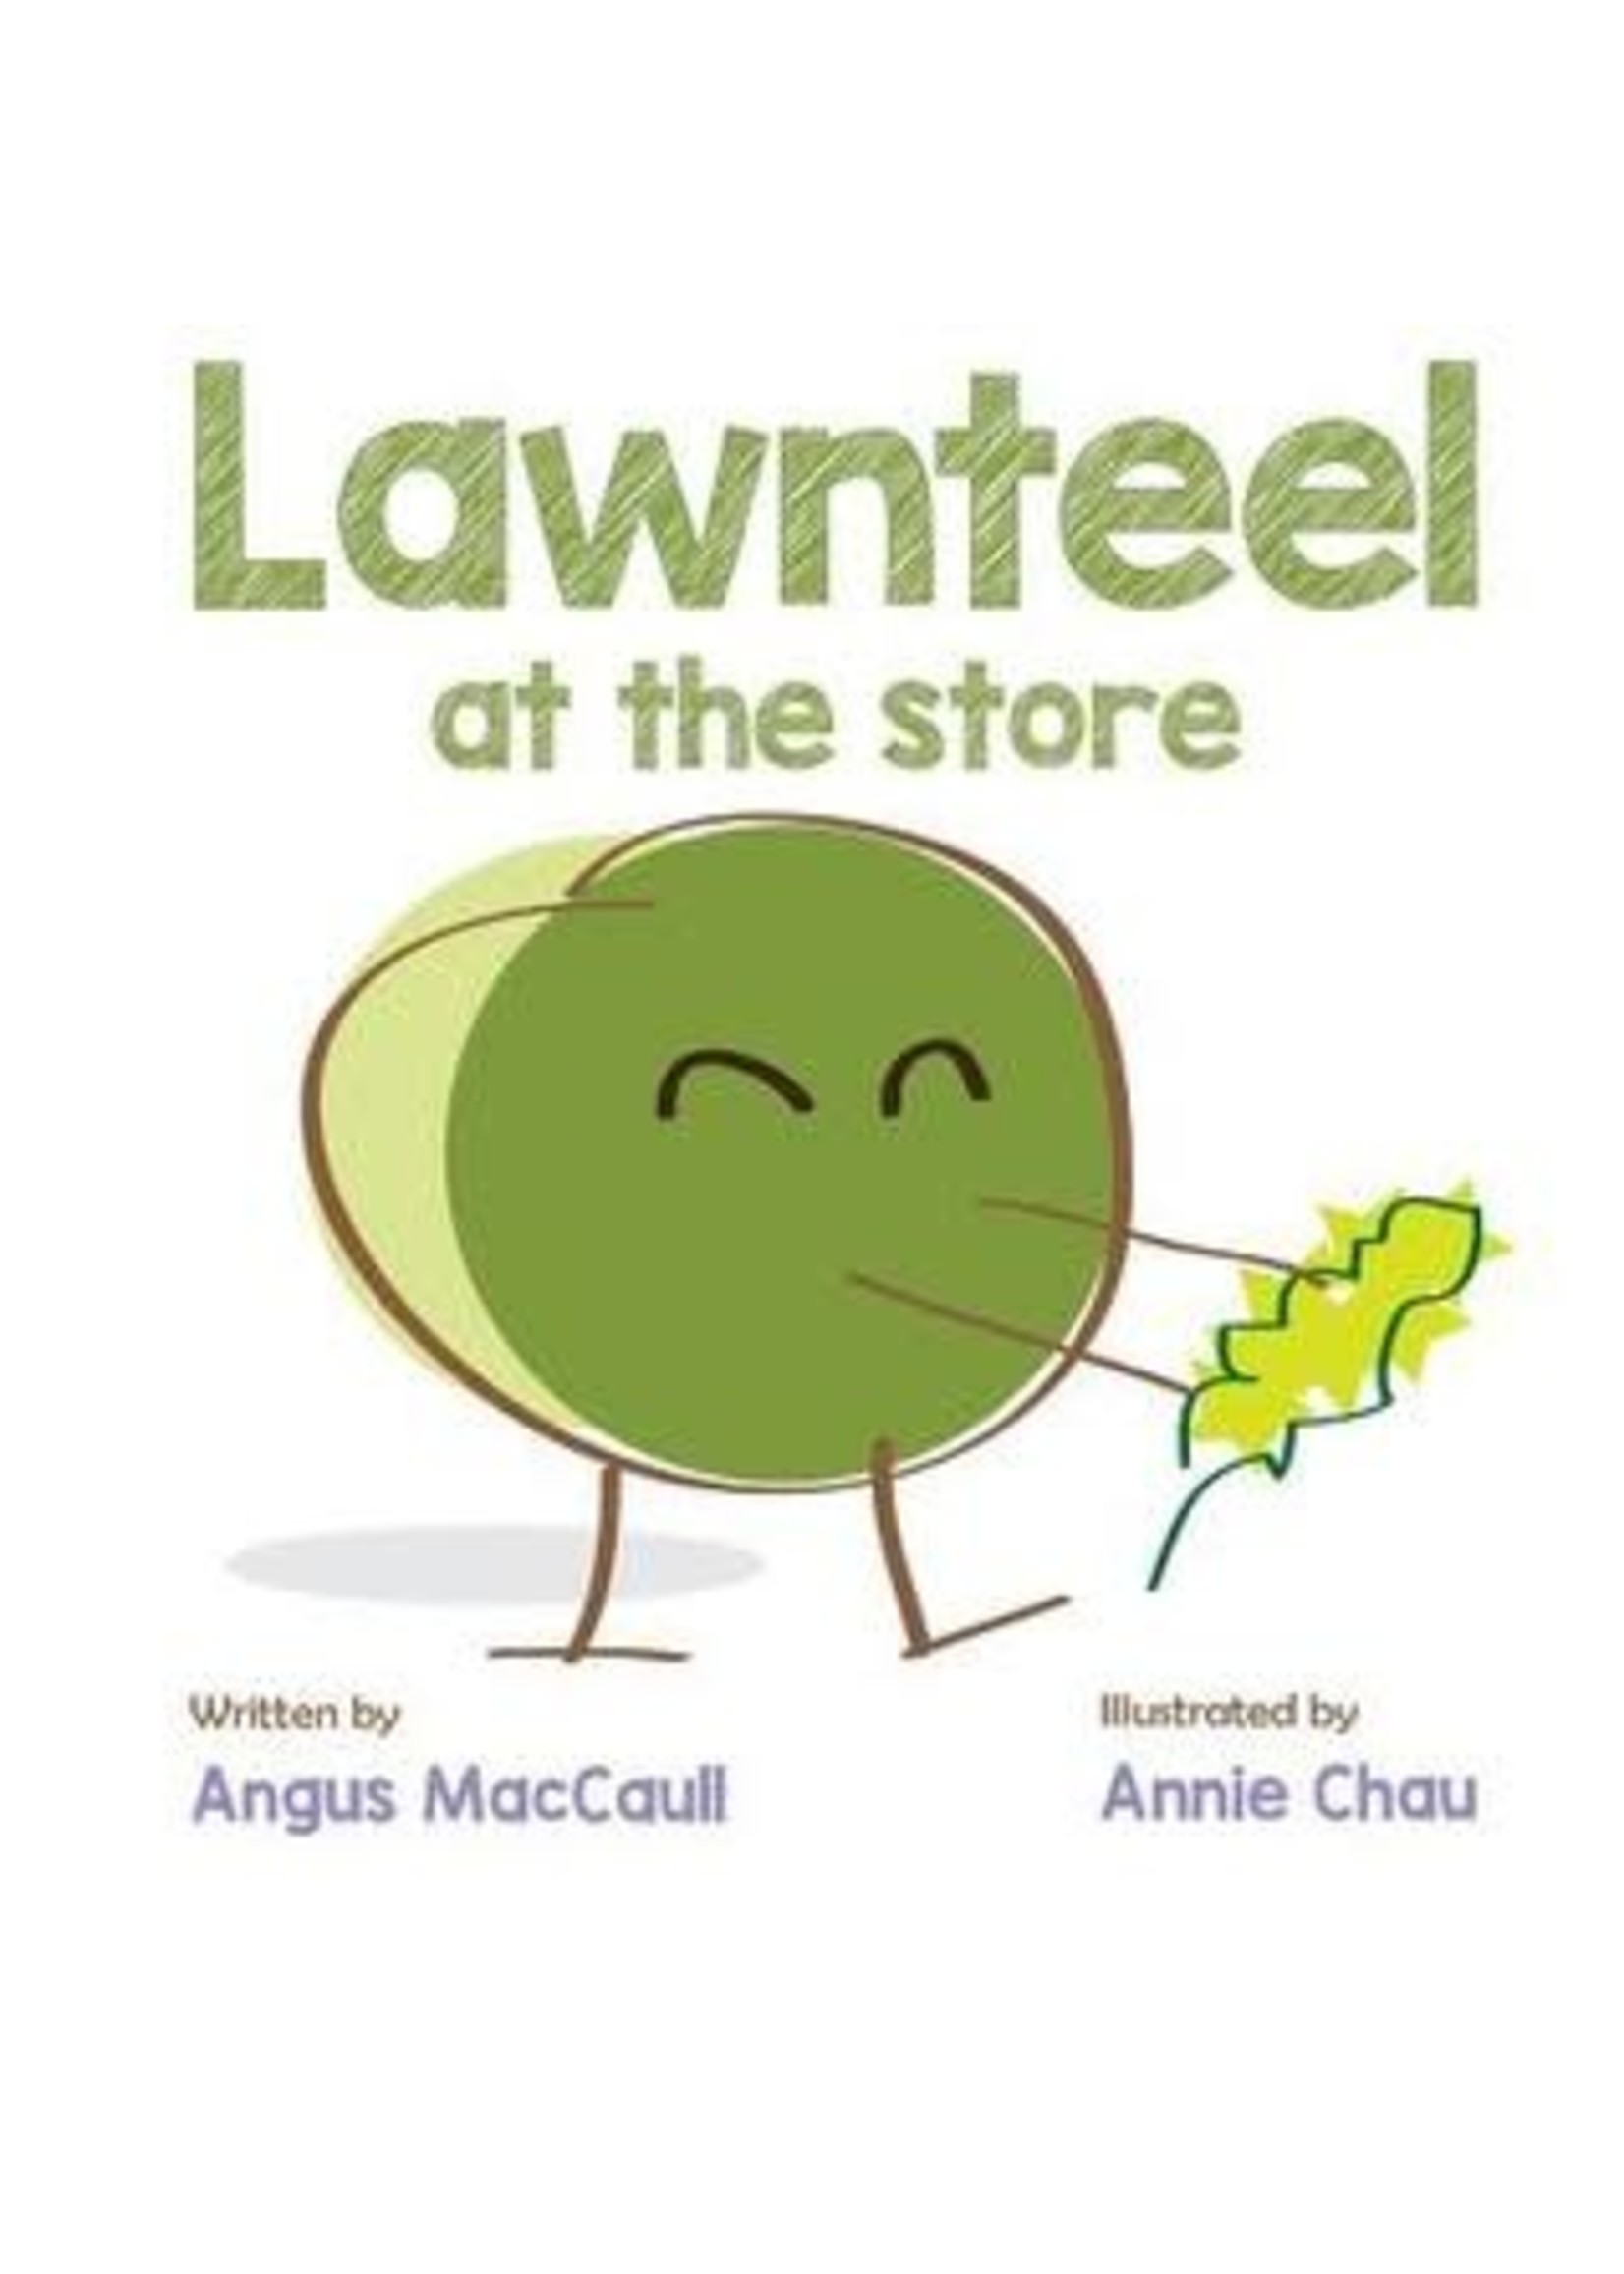 Lawnteel at the Store by Angus MacCaull